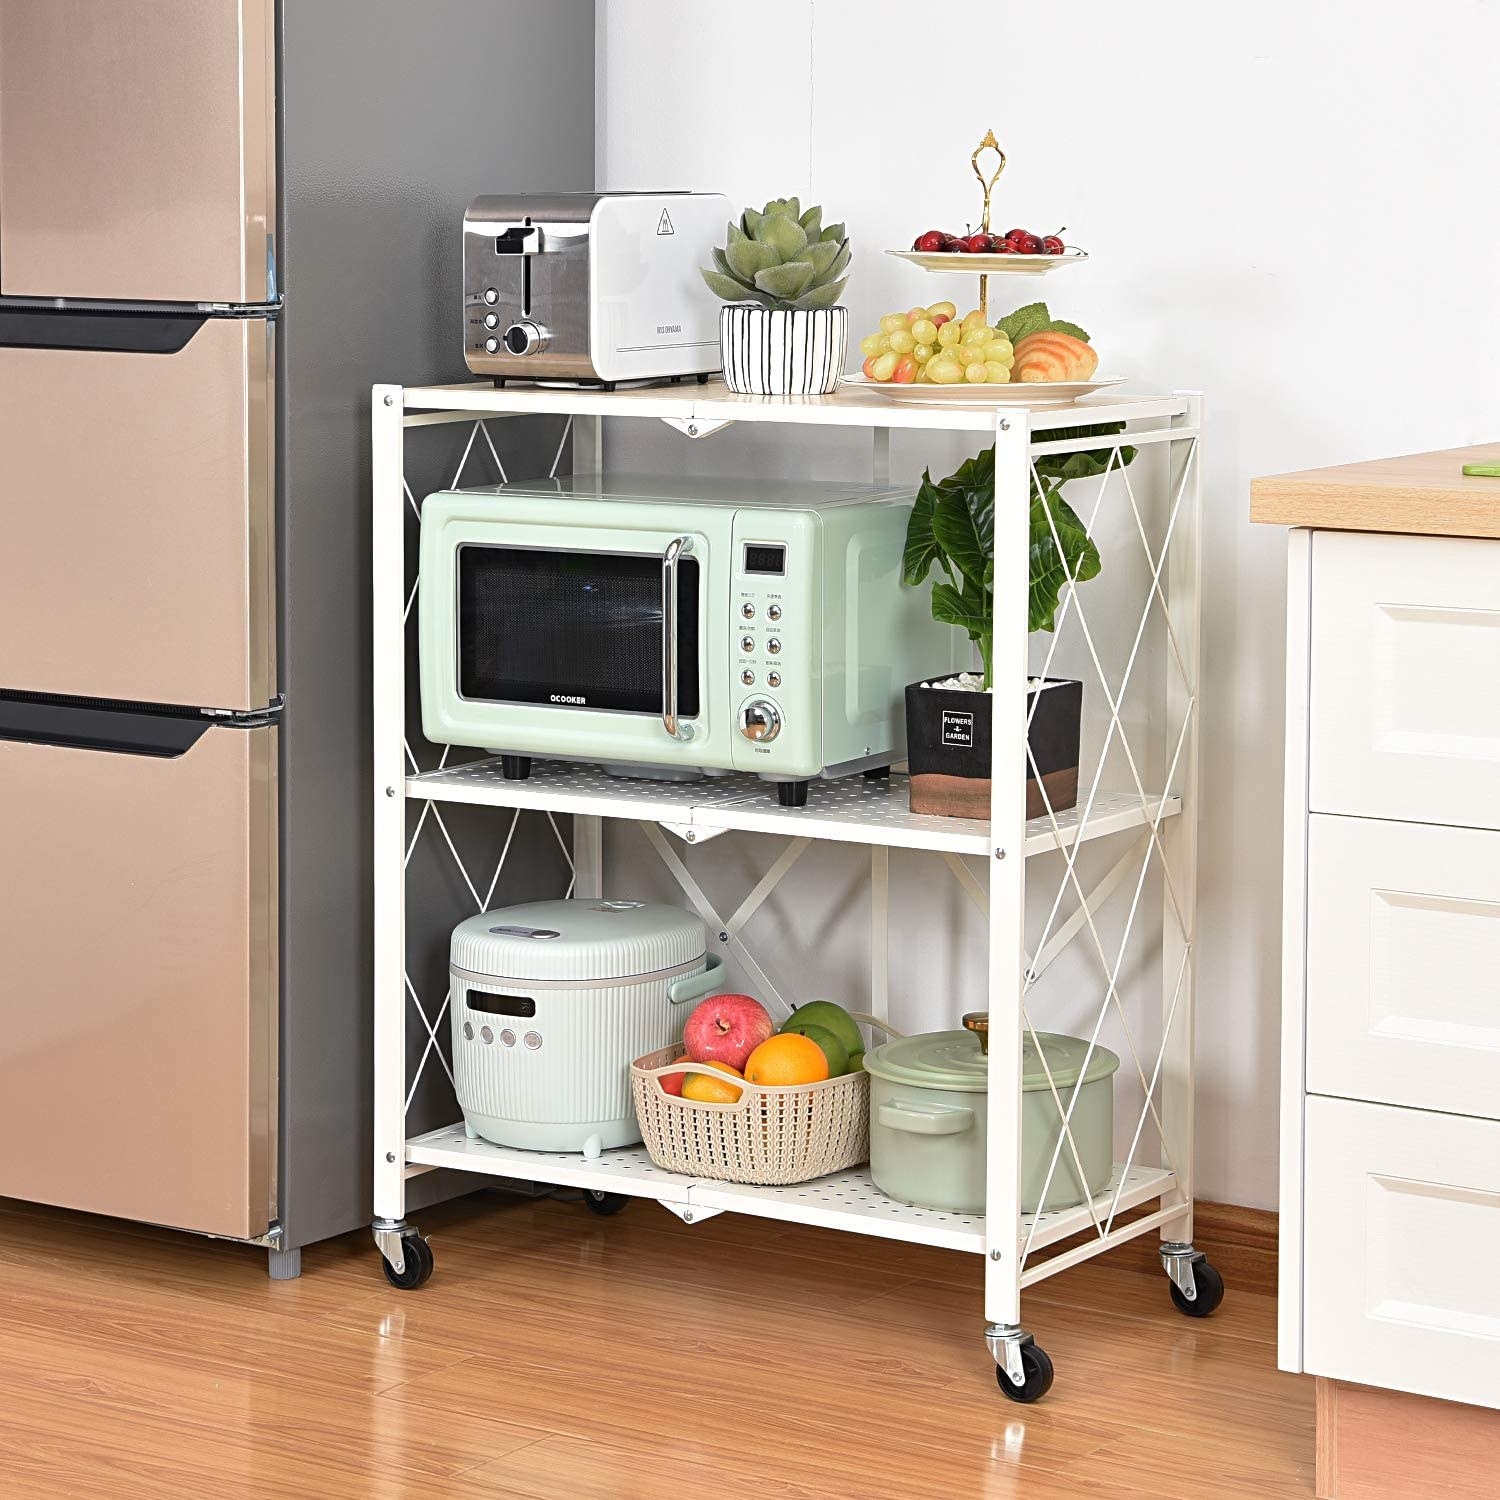 the fold-out rolling rack filled with small kitchen appliances and decorative items